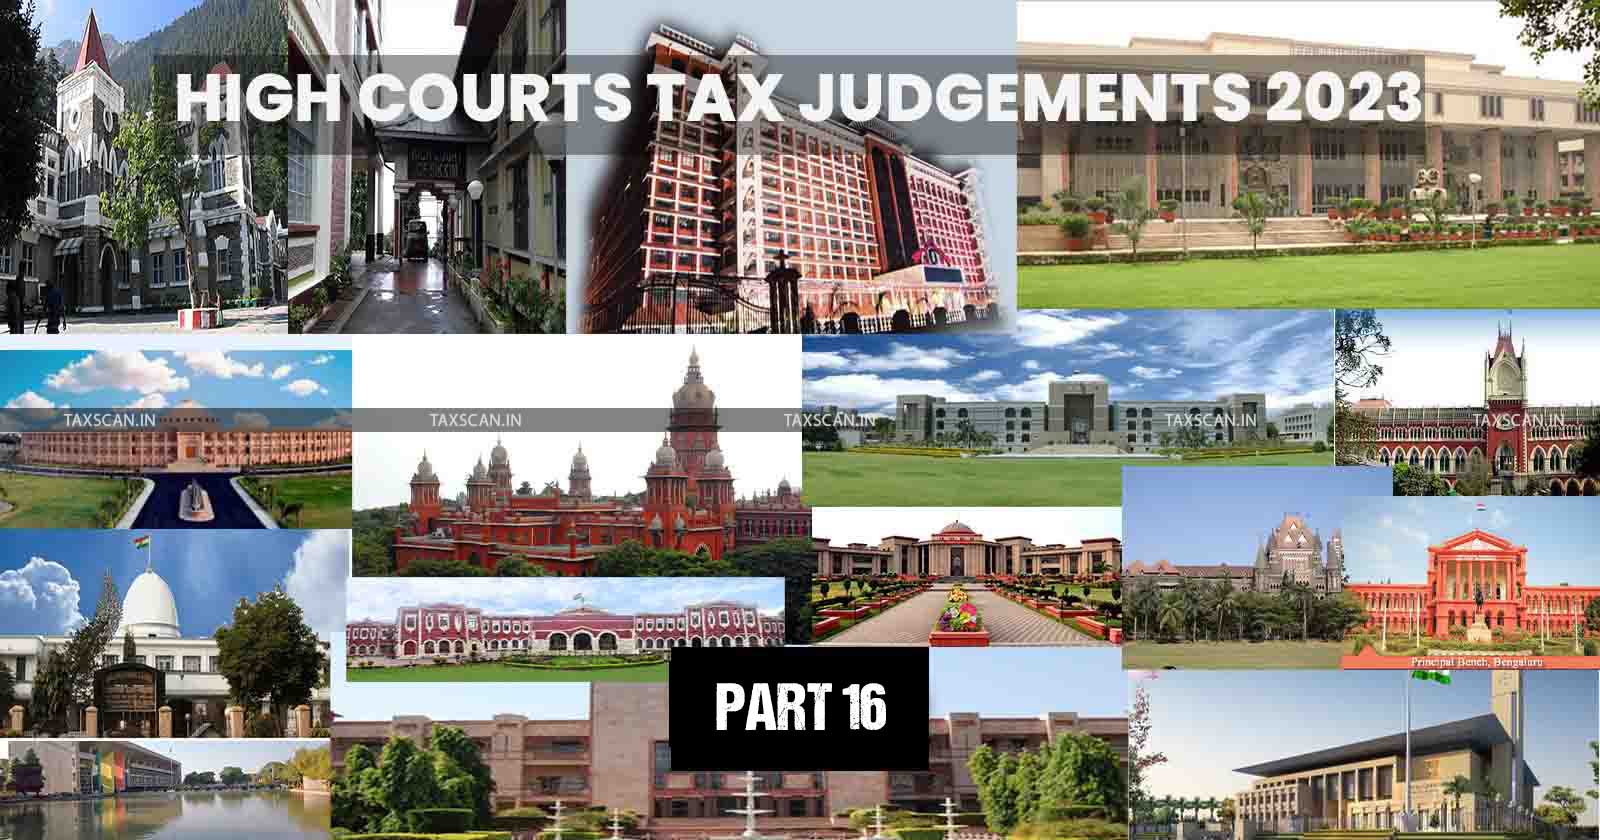 Tax Judgment of HC Annual Digest 2023 - high courts - hc - Tax Judgment of HC Annual Digest - tax judgments of high courts annual digest - taxscan